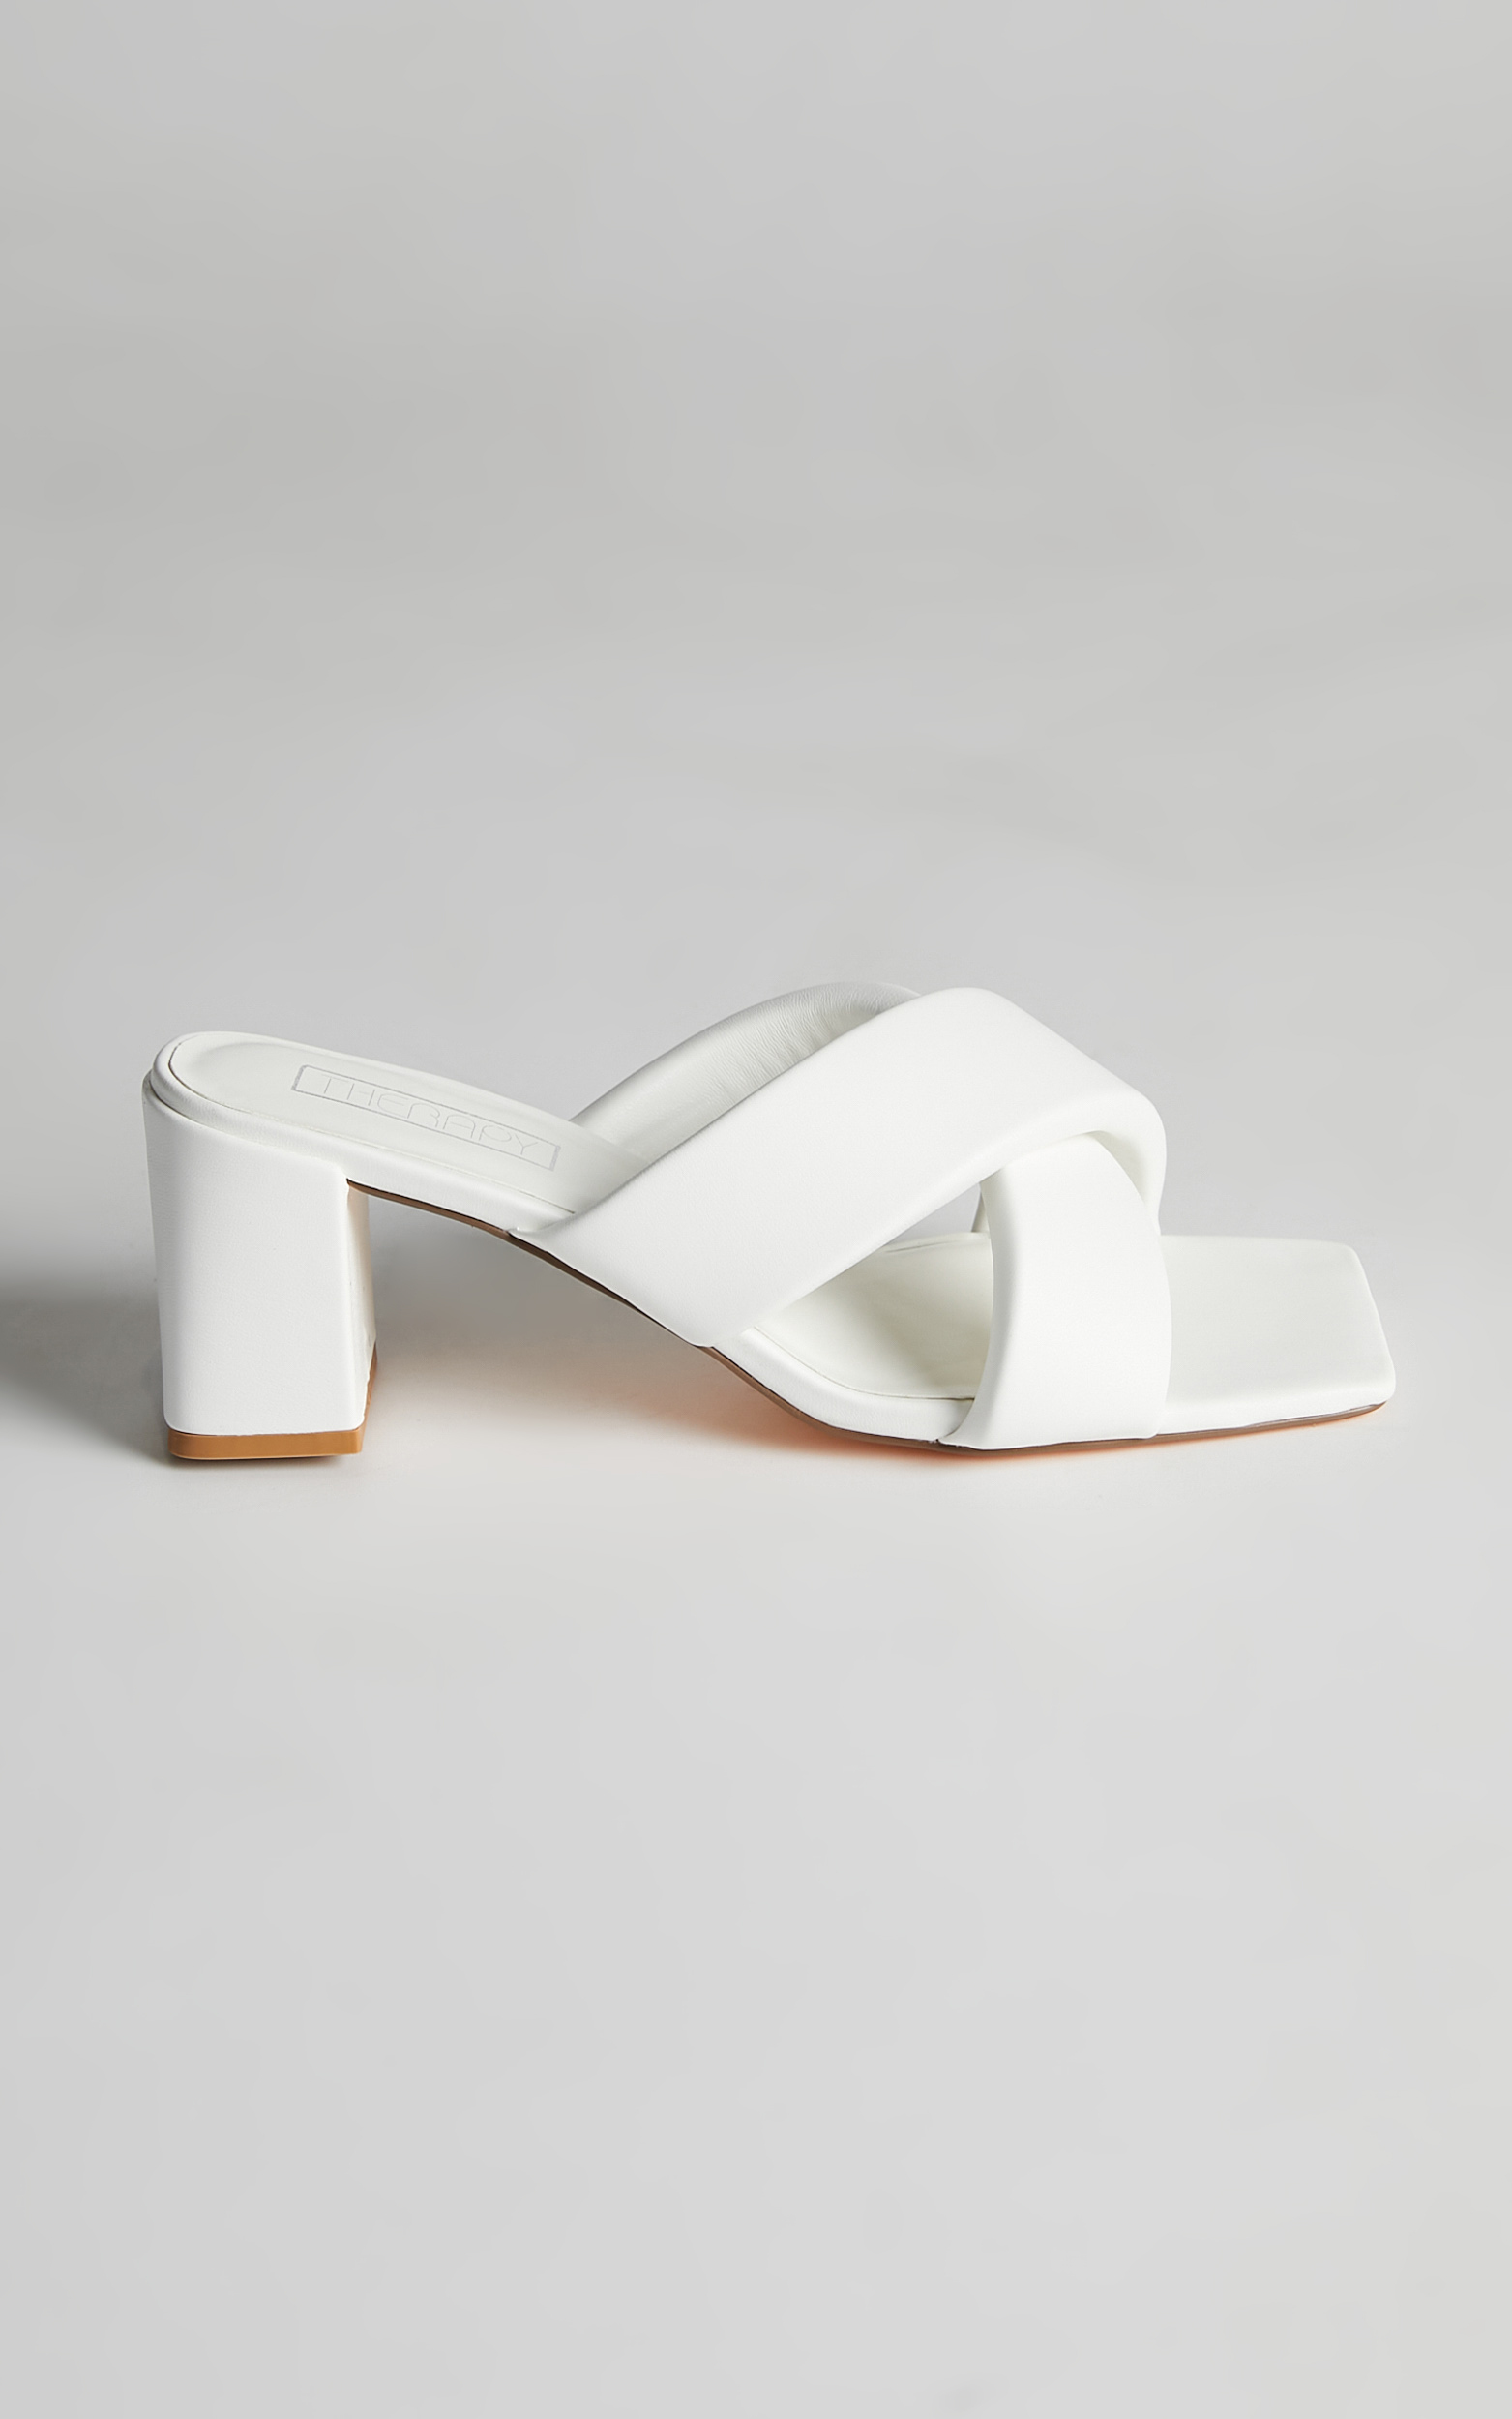 Therapy - Mary-Kate Heels in White - 06, WHT2, hi-res image number null